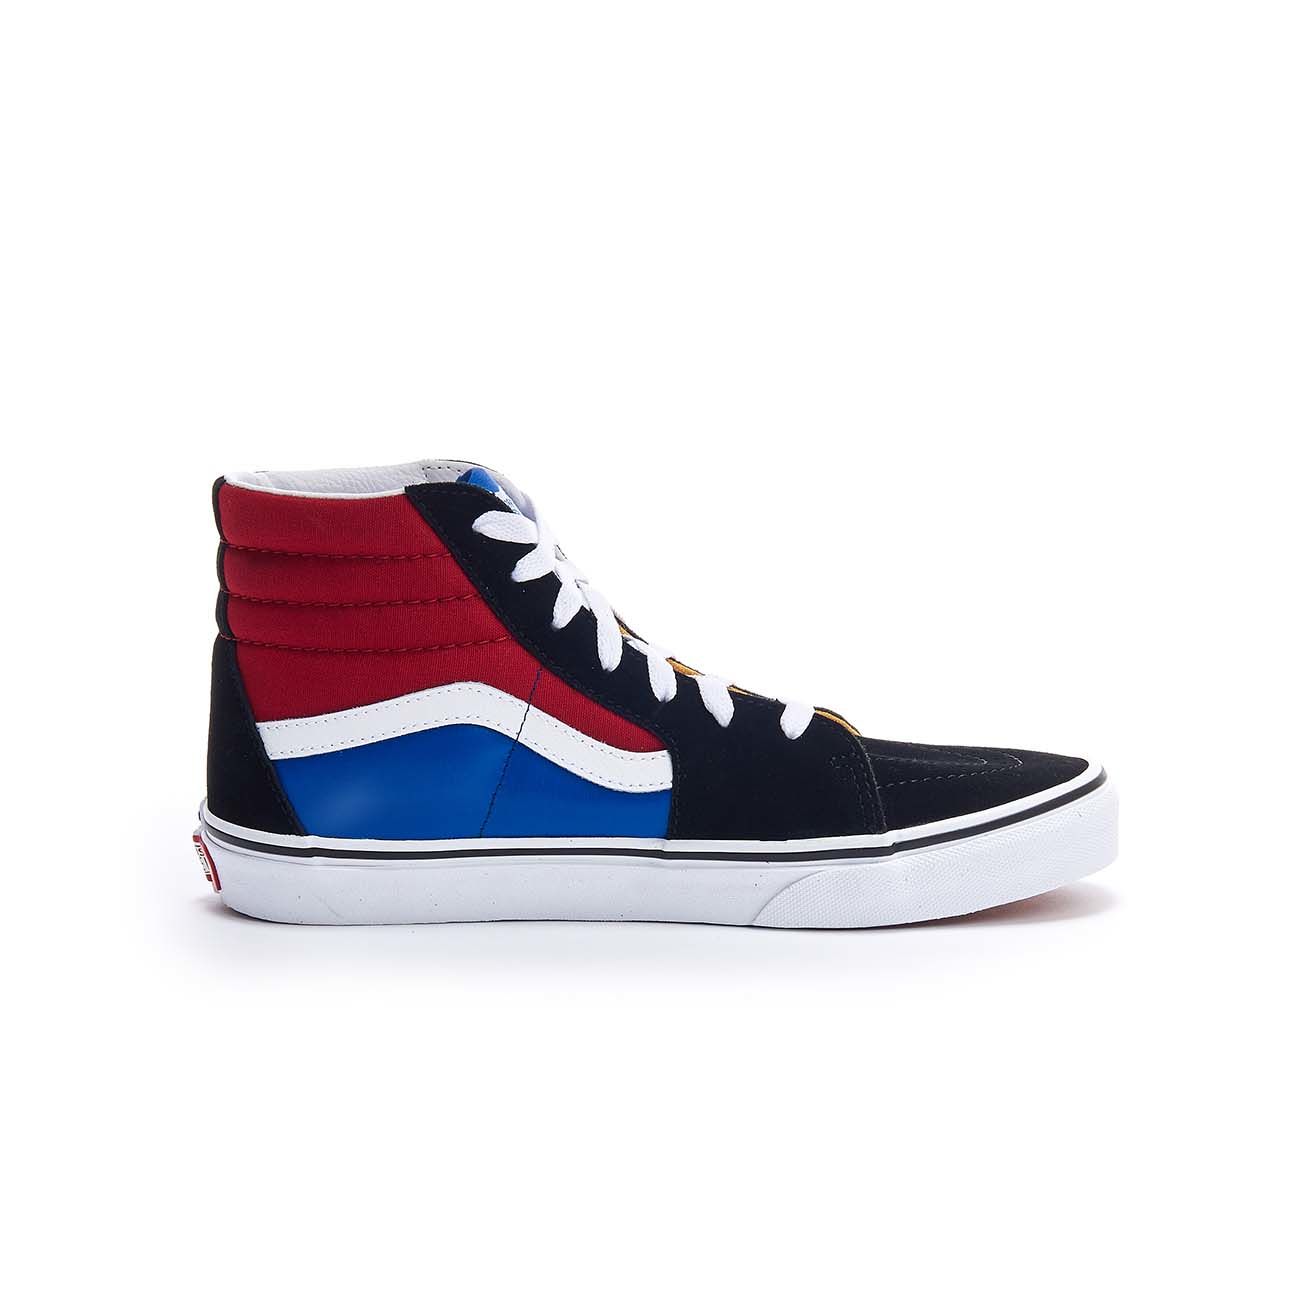 VANS SK8-HI HIGH AND Black FABRIC IN Store SNEAKER ECO-LEATHER Kid Pepper | Chilli Mascheroni